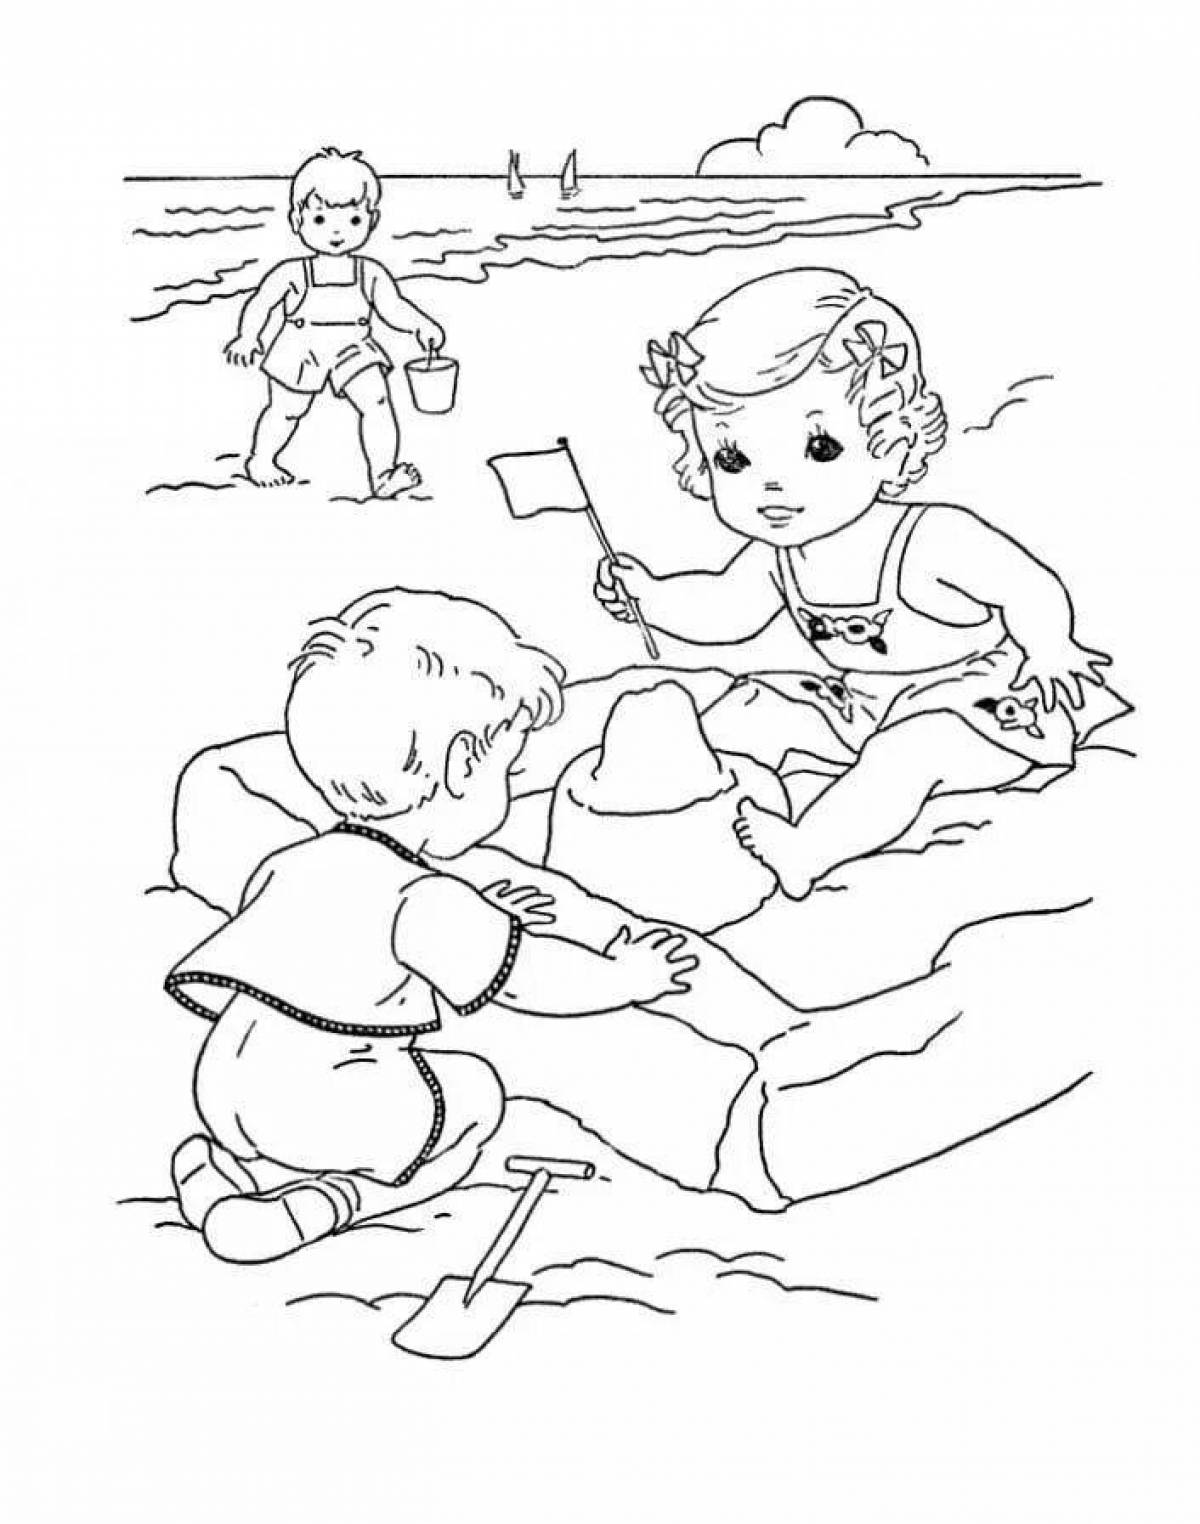 Live coloring of childhood